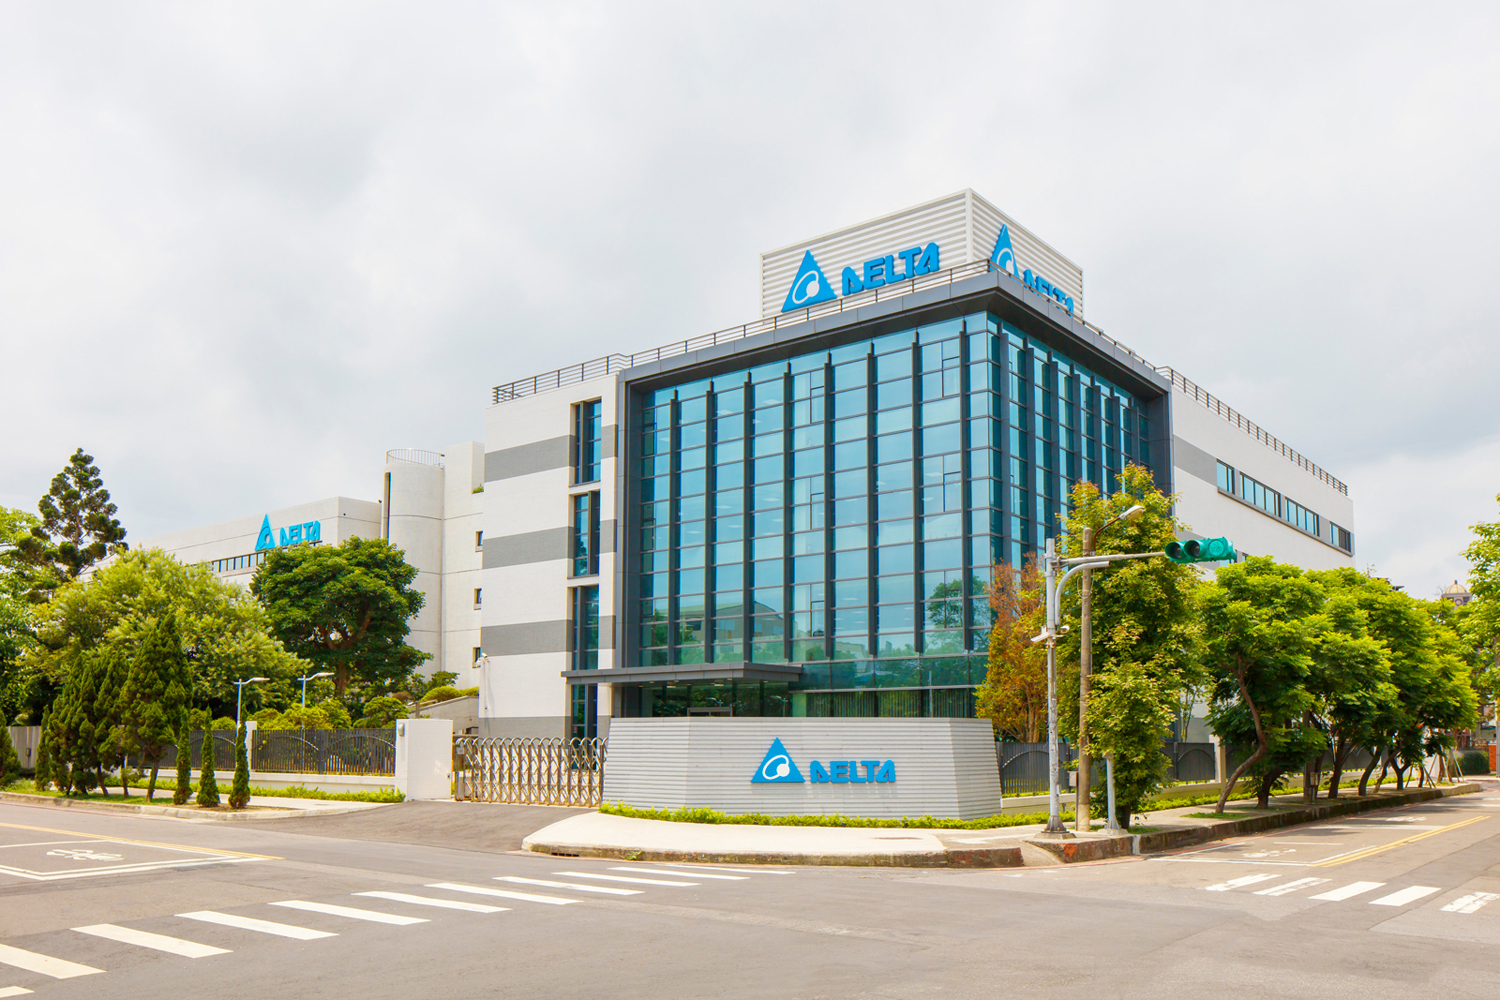 In Taiwan, two production sites based in Taoyuan city are built with outstanding customized production technology and rapid manufacturing culture. The site is located in the medical focus city in Taiwan, with a supply chain around the production base and adjacent Taiwan International Airport, which can provide fast and diversified production services.